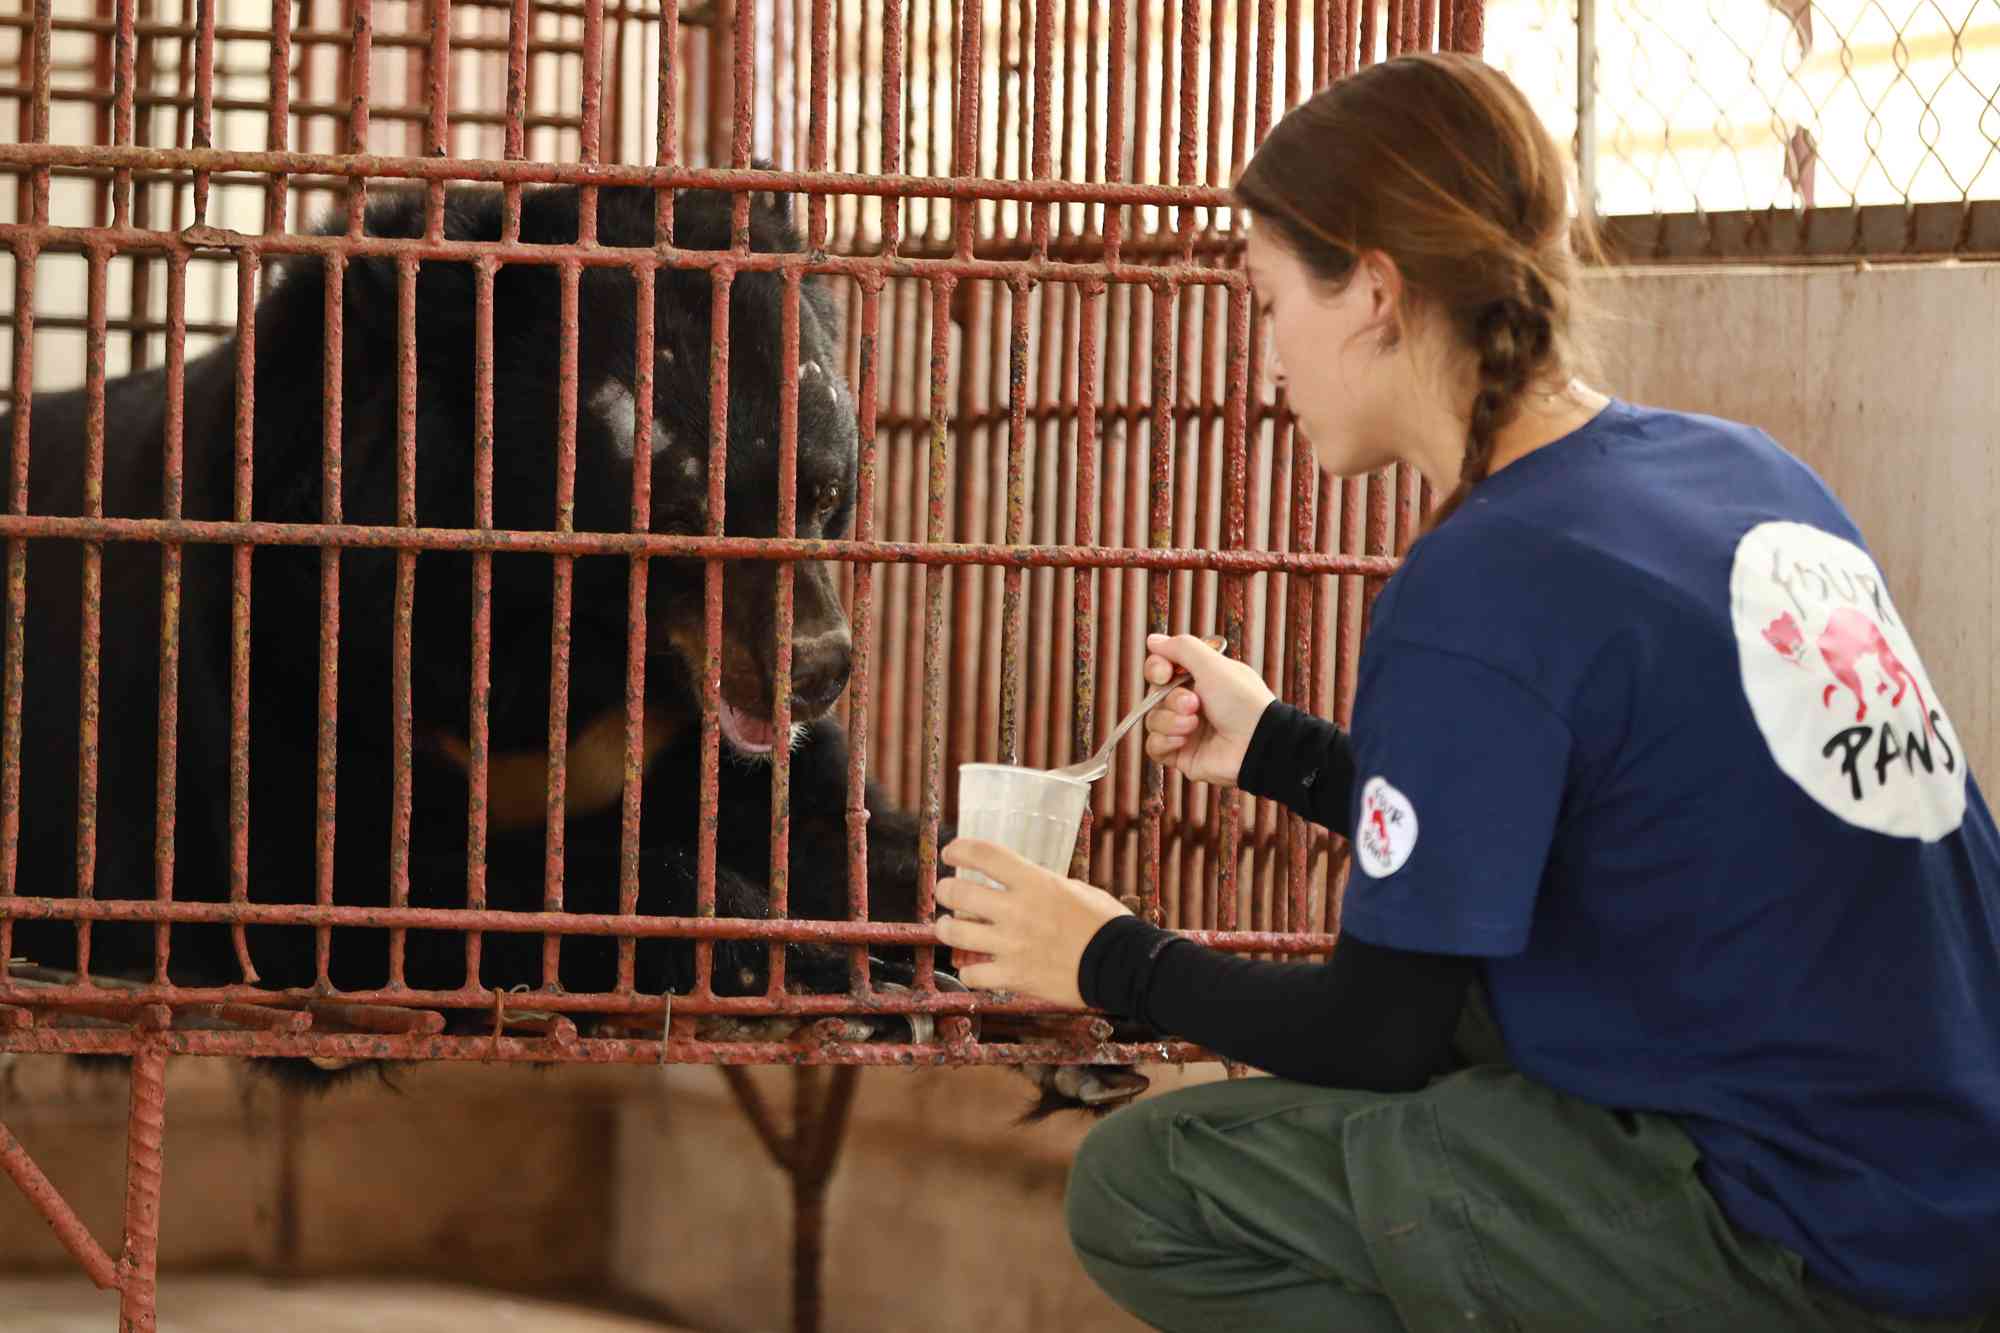 Bear Kept in Tiny Indoor Cage Sees the Outdoors for the First Time in 20 Years During His Rescue